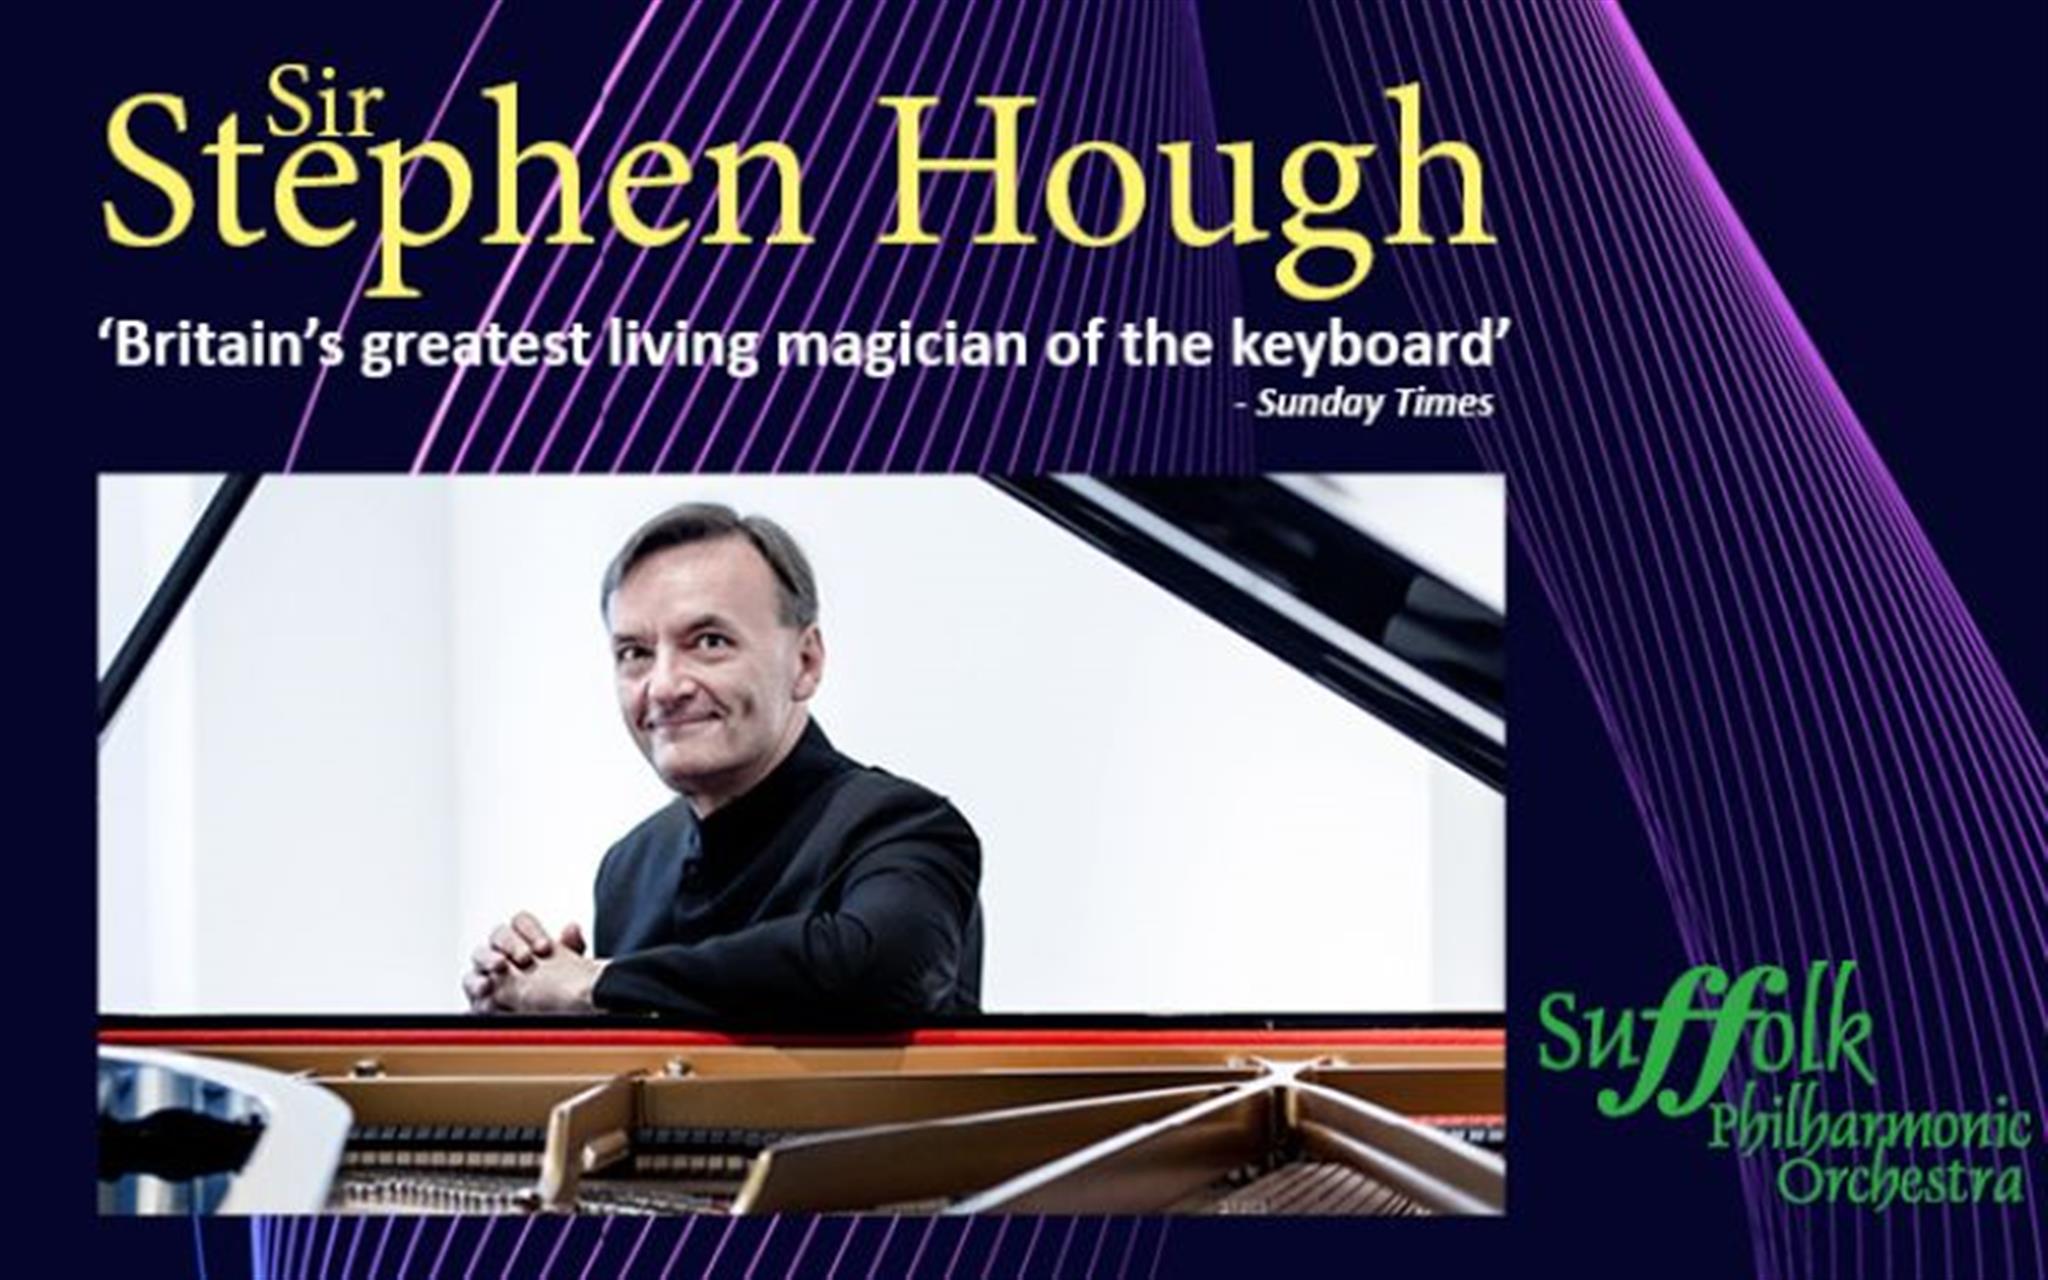 Suffolk Phil and Sir Stephen Hough